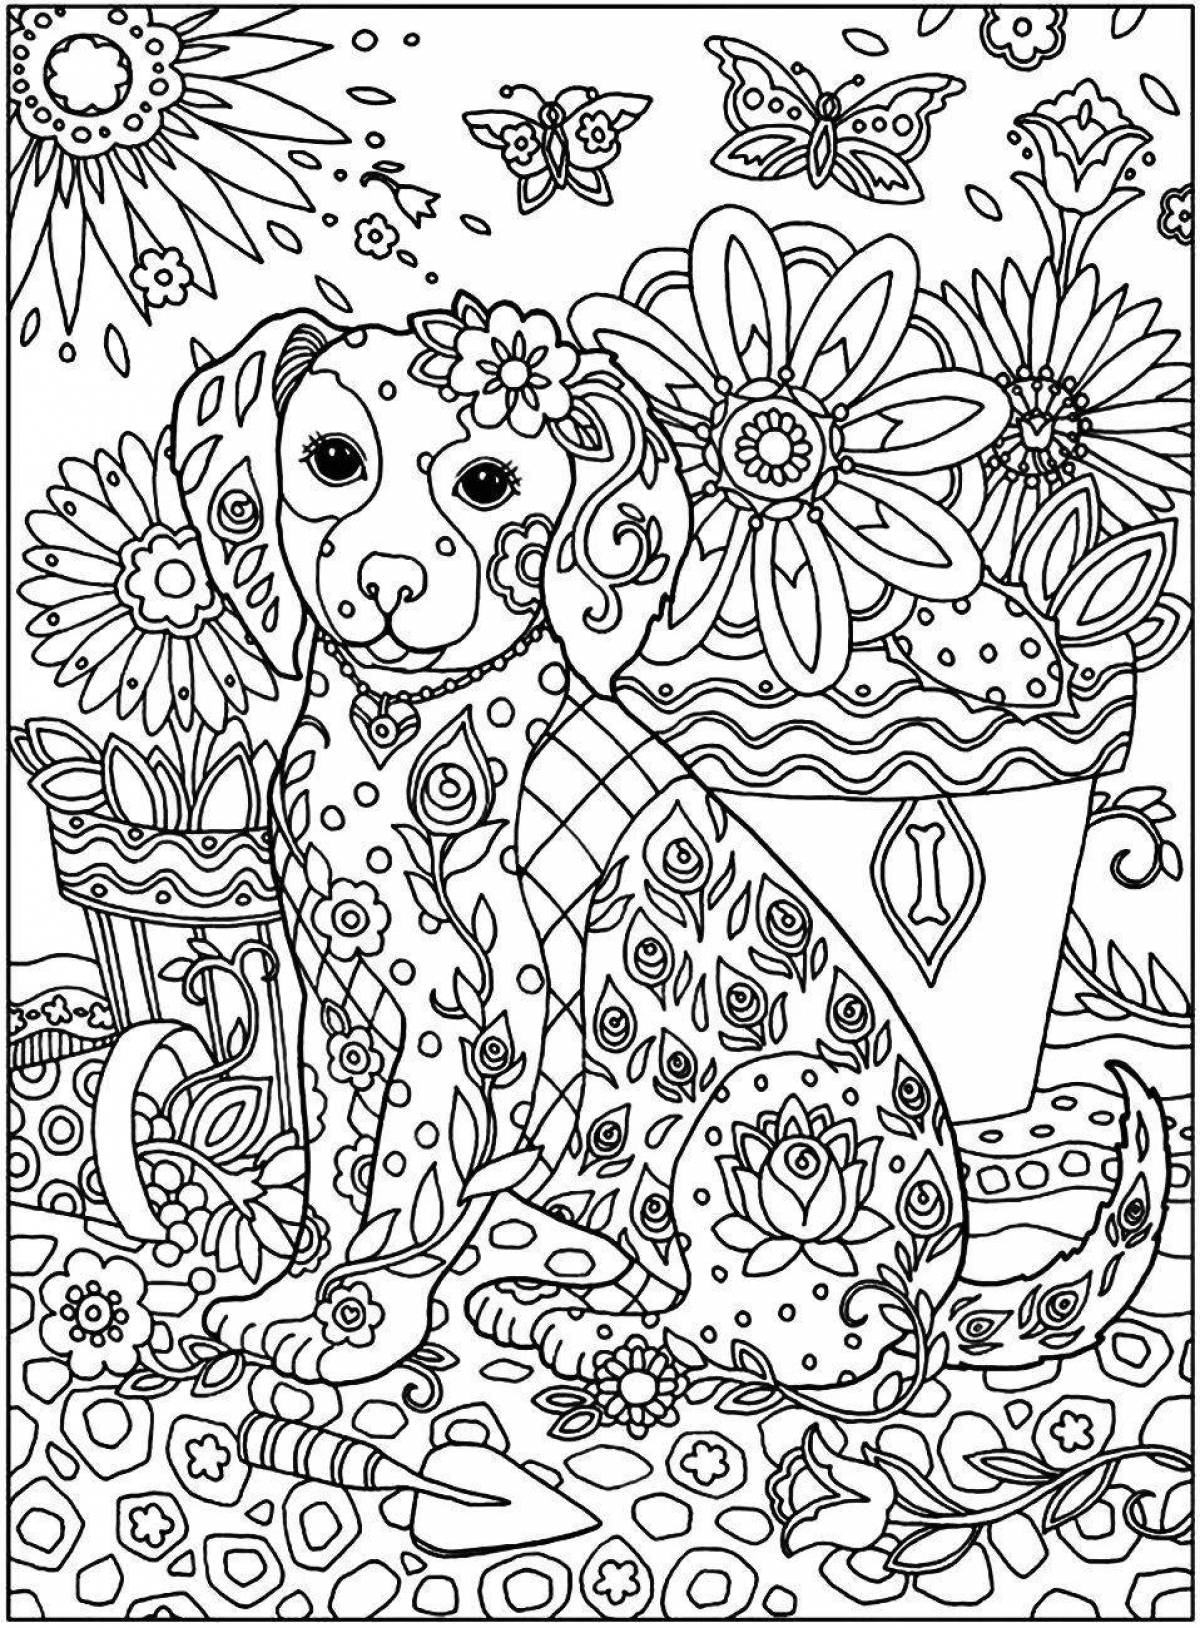 Outstanding coloring book for 8 year old girls